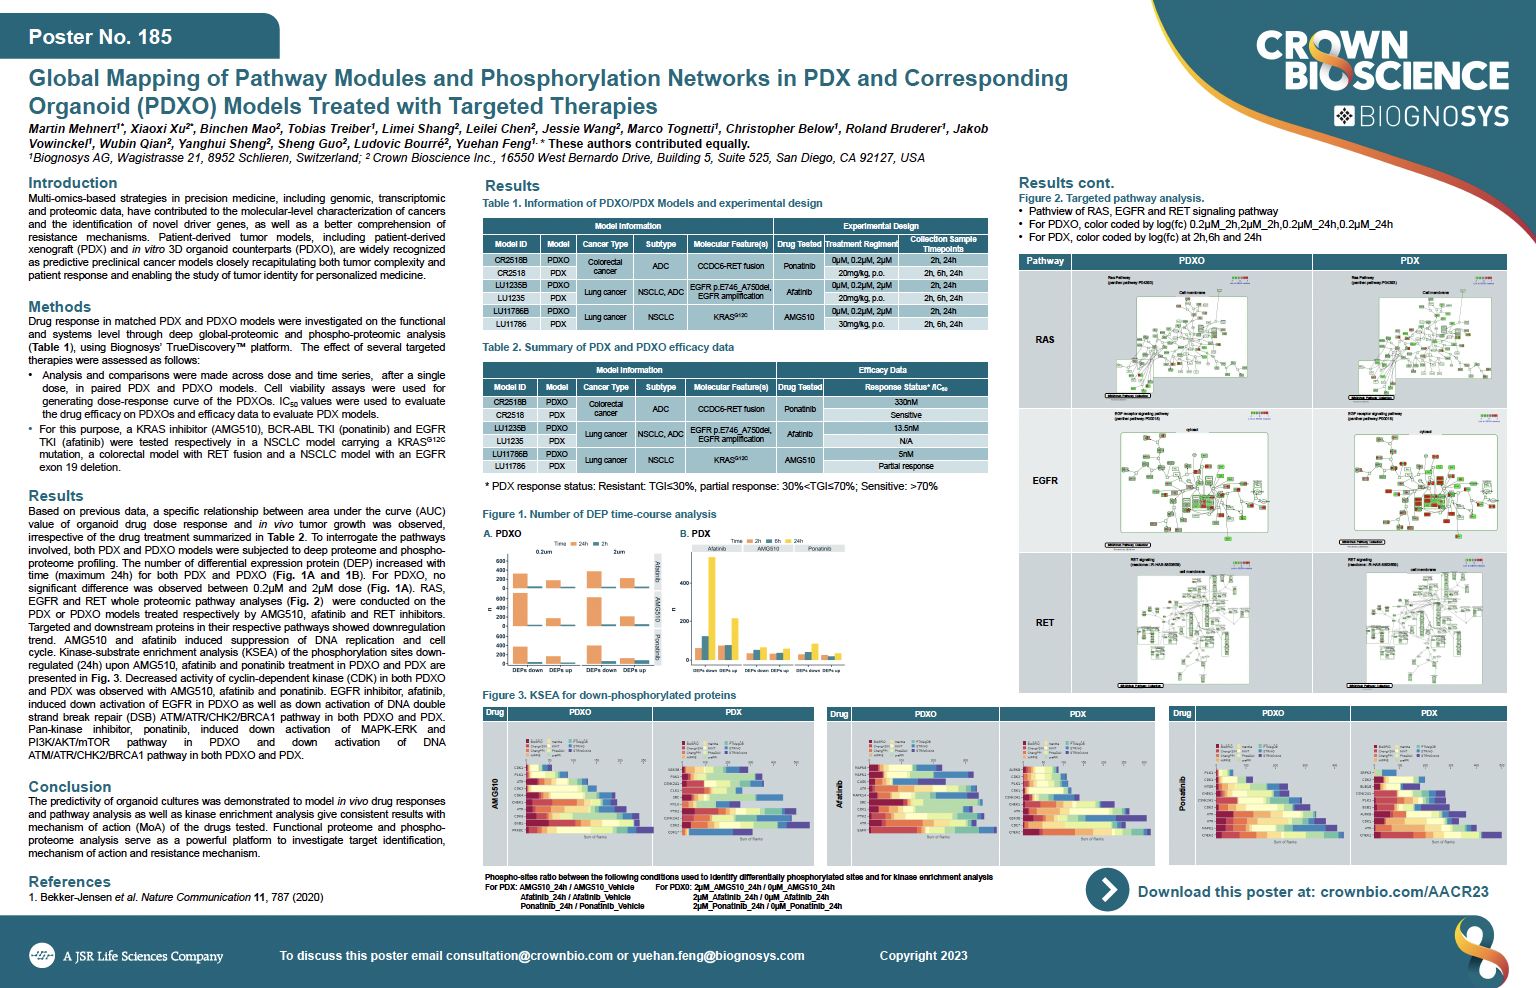 AACR 2023 Posters 185: Global Mapping of Pathway Modules and Phosphorylation Networks in PDX and Corresponding Organoid (PDXO) Models Treated with Targeted Therapies